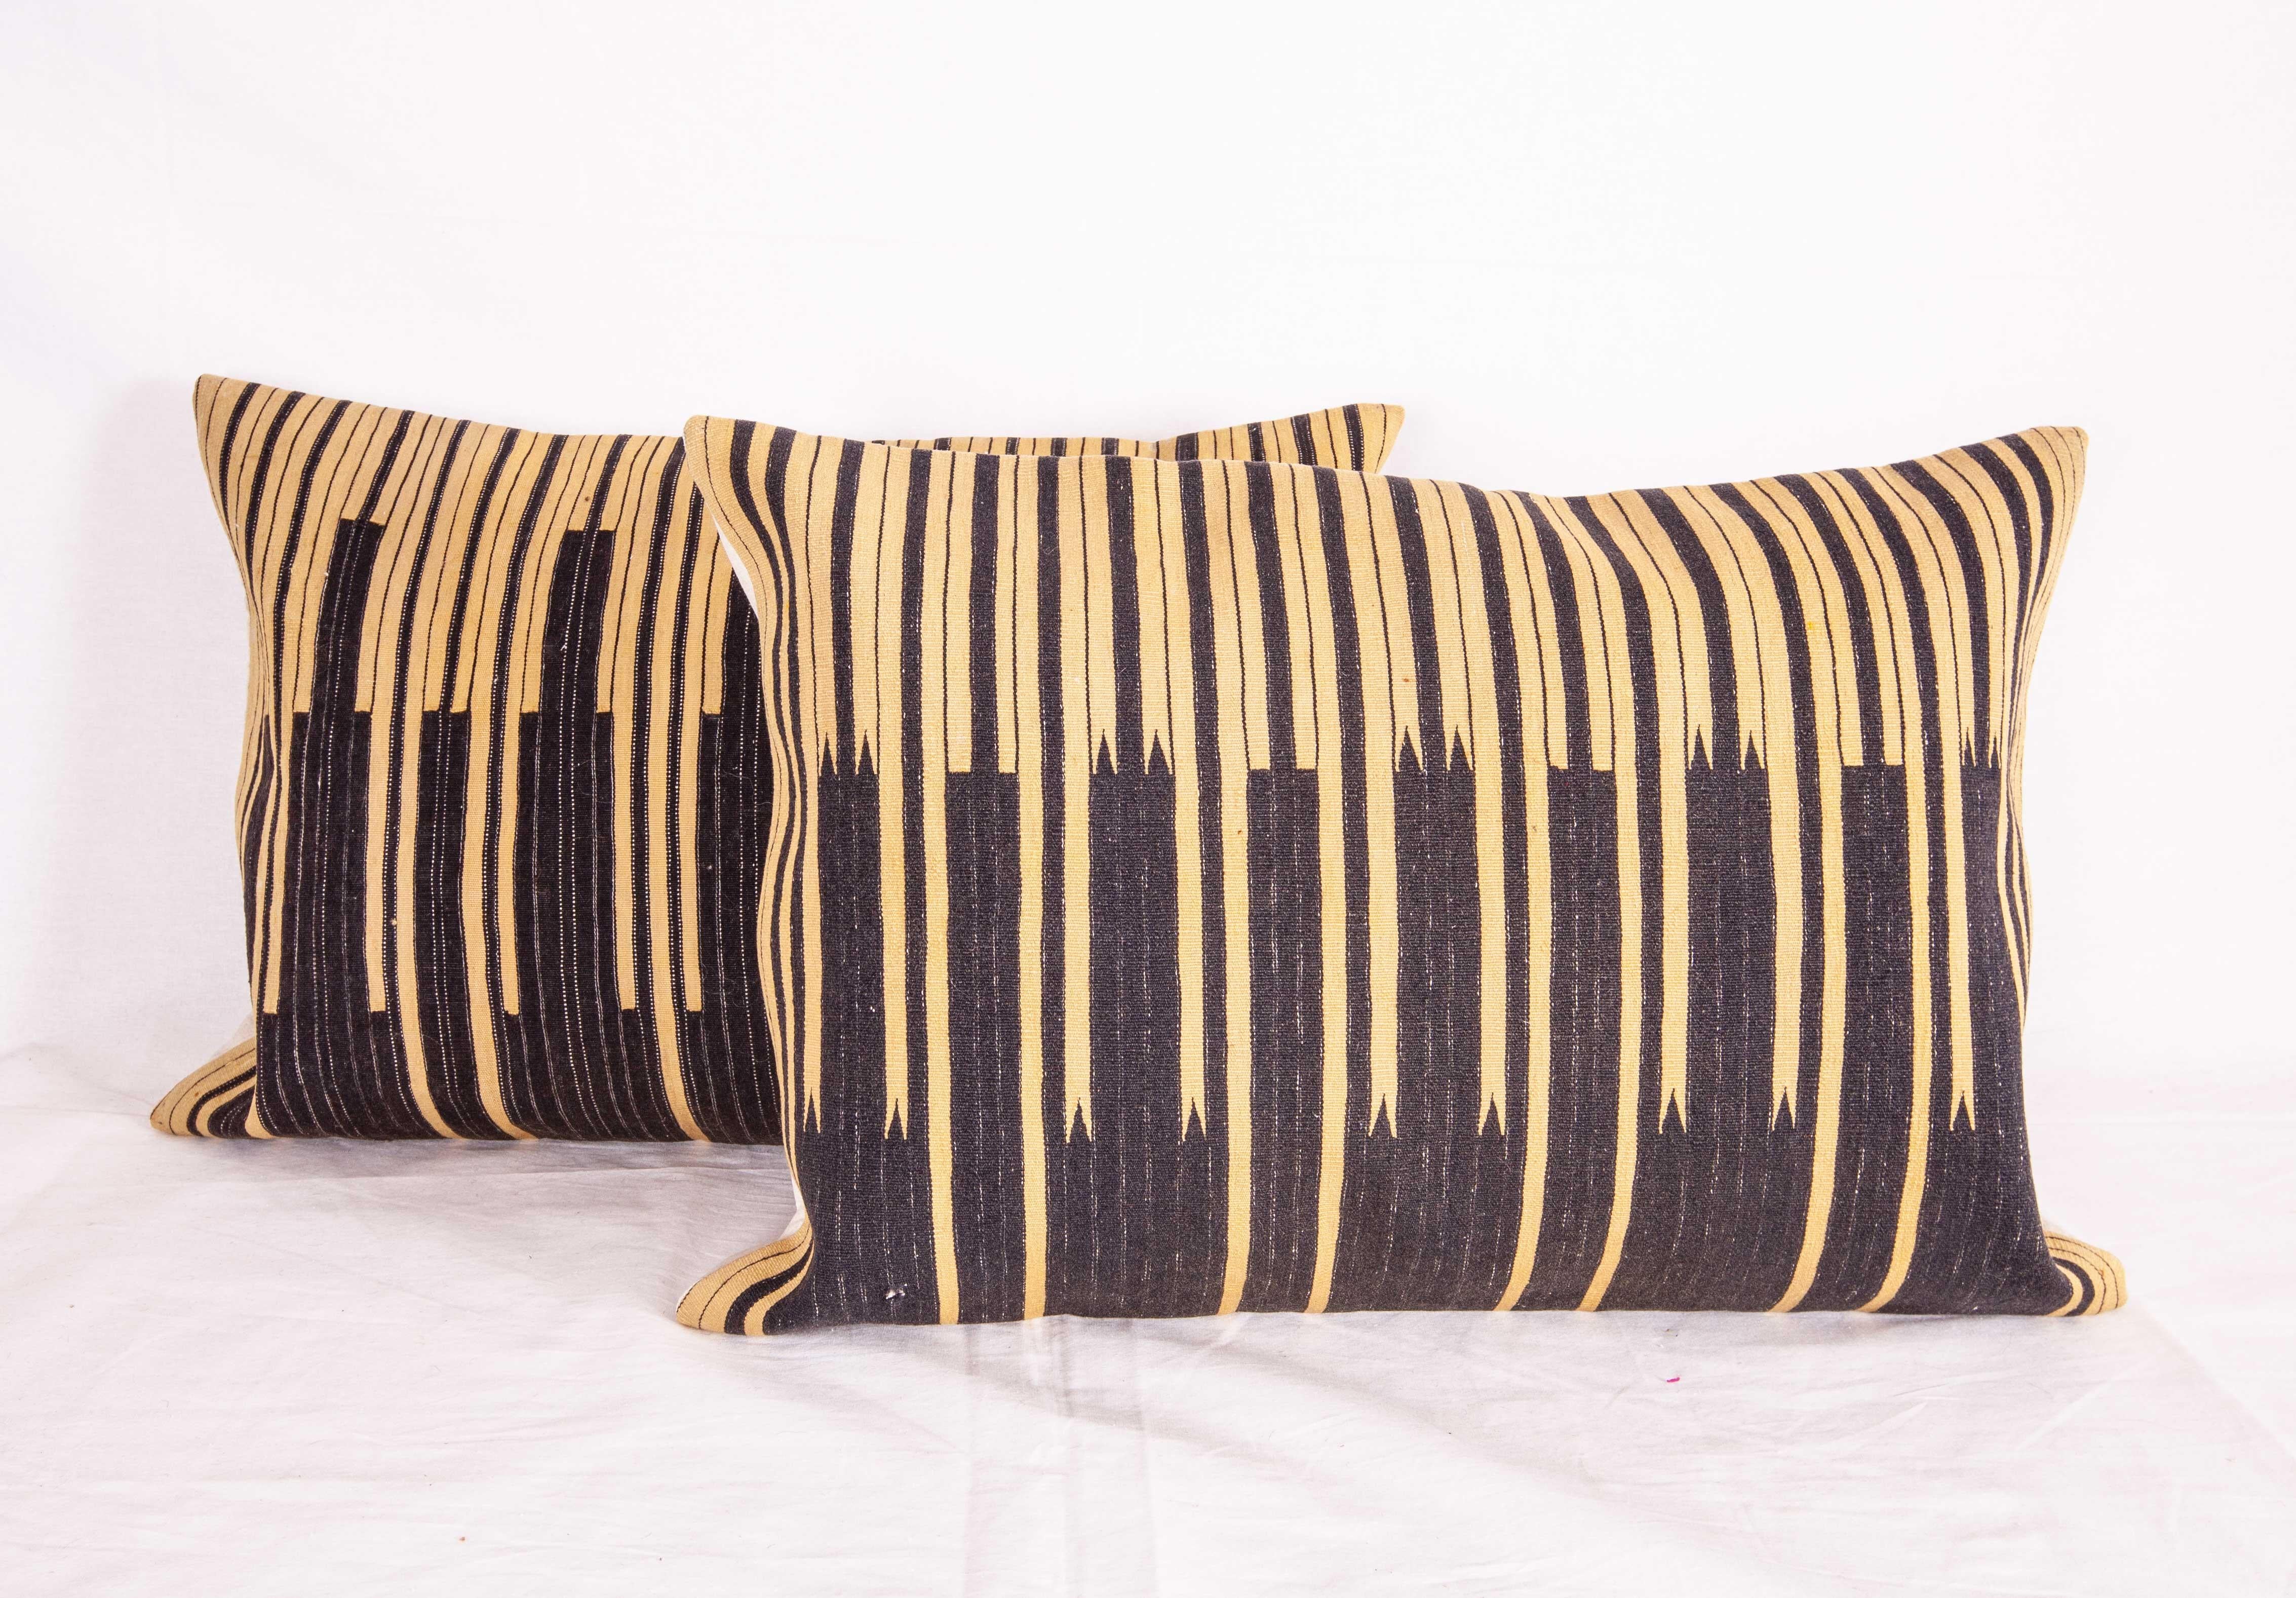 Hand-Woven Pillow Cases Fashioned from an Old Indigo Kilim, Mid-20th Century